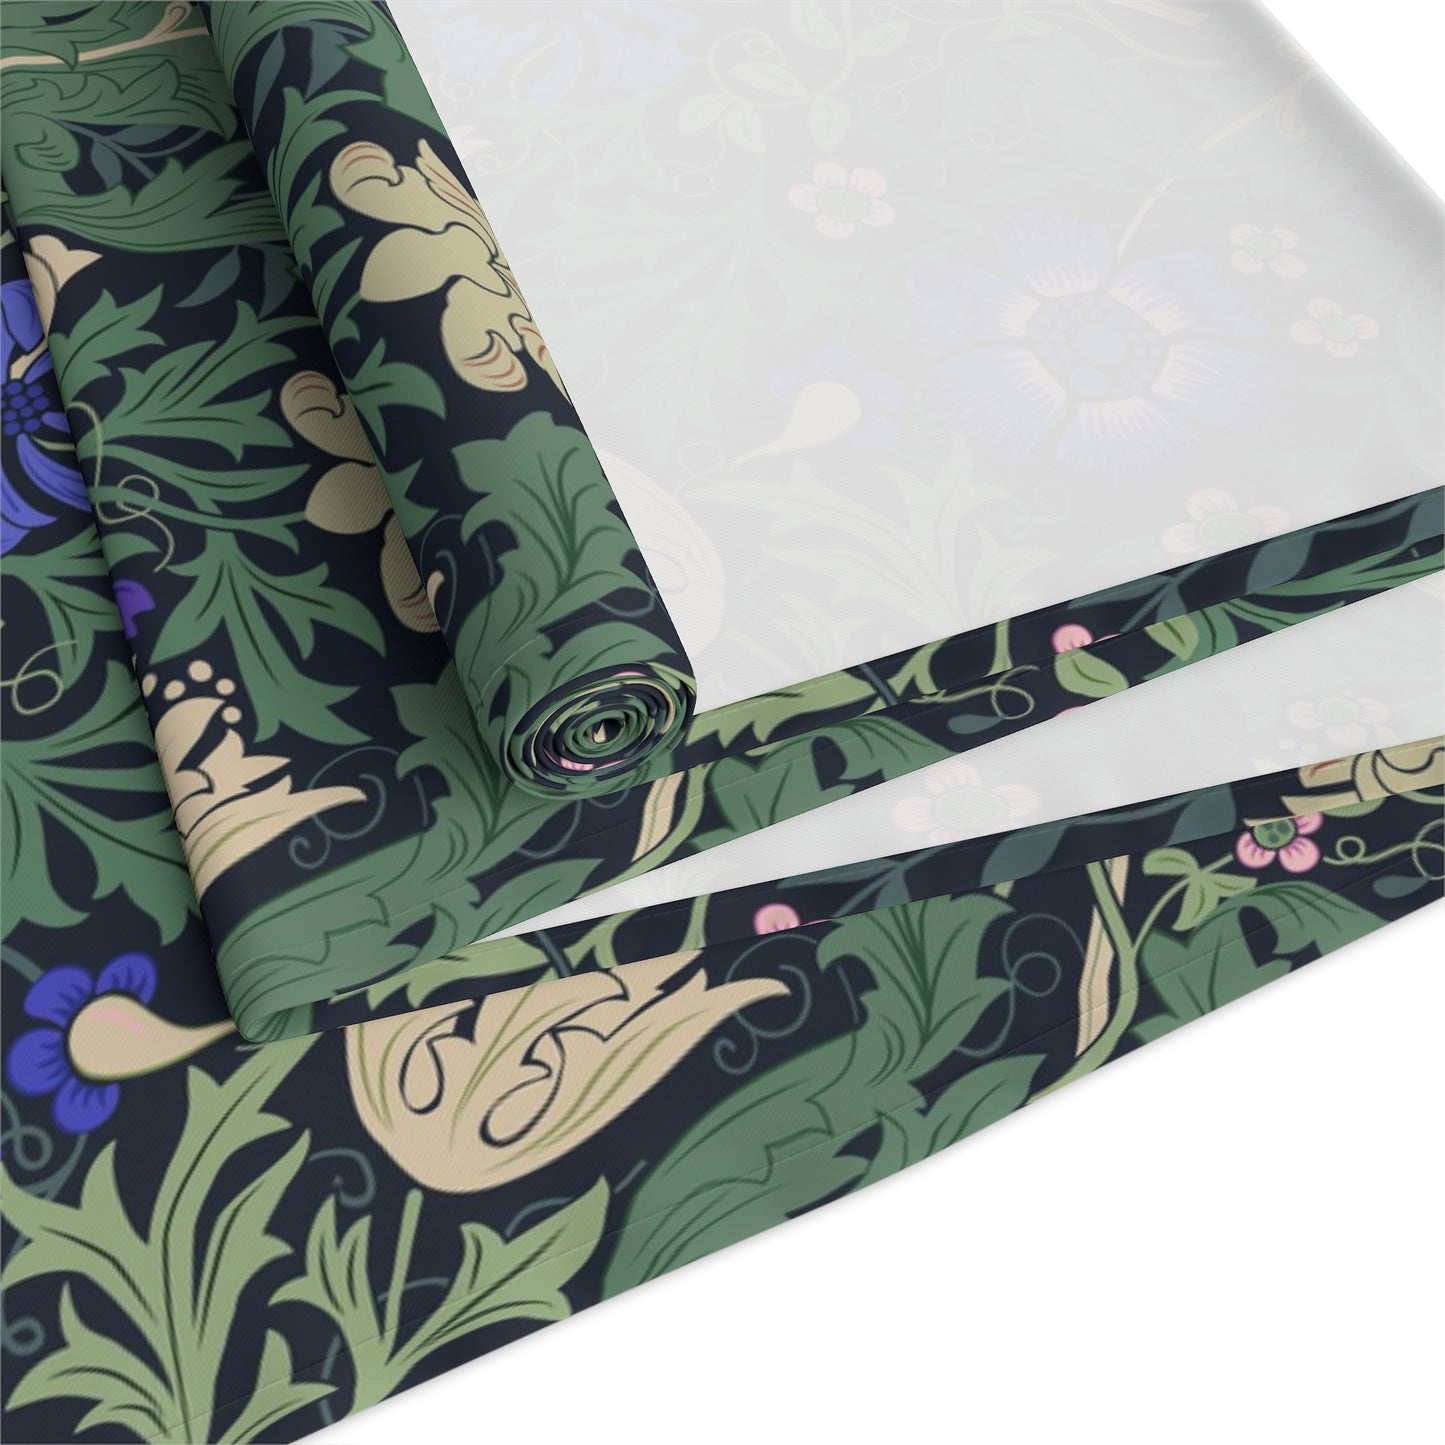 William Morris & Co Table Runner - Compton Collection (Bluebell Cottage)